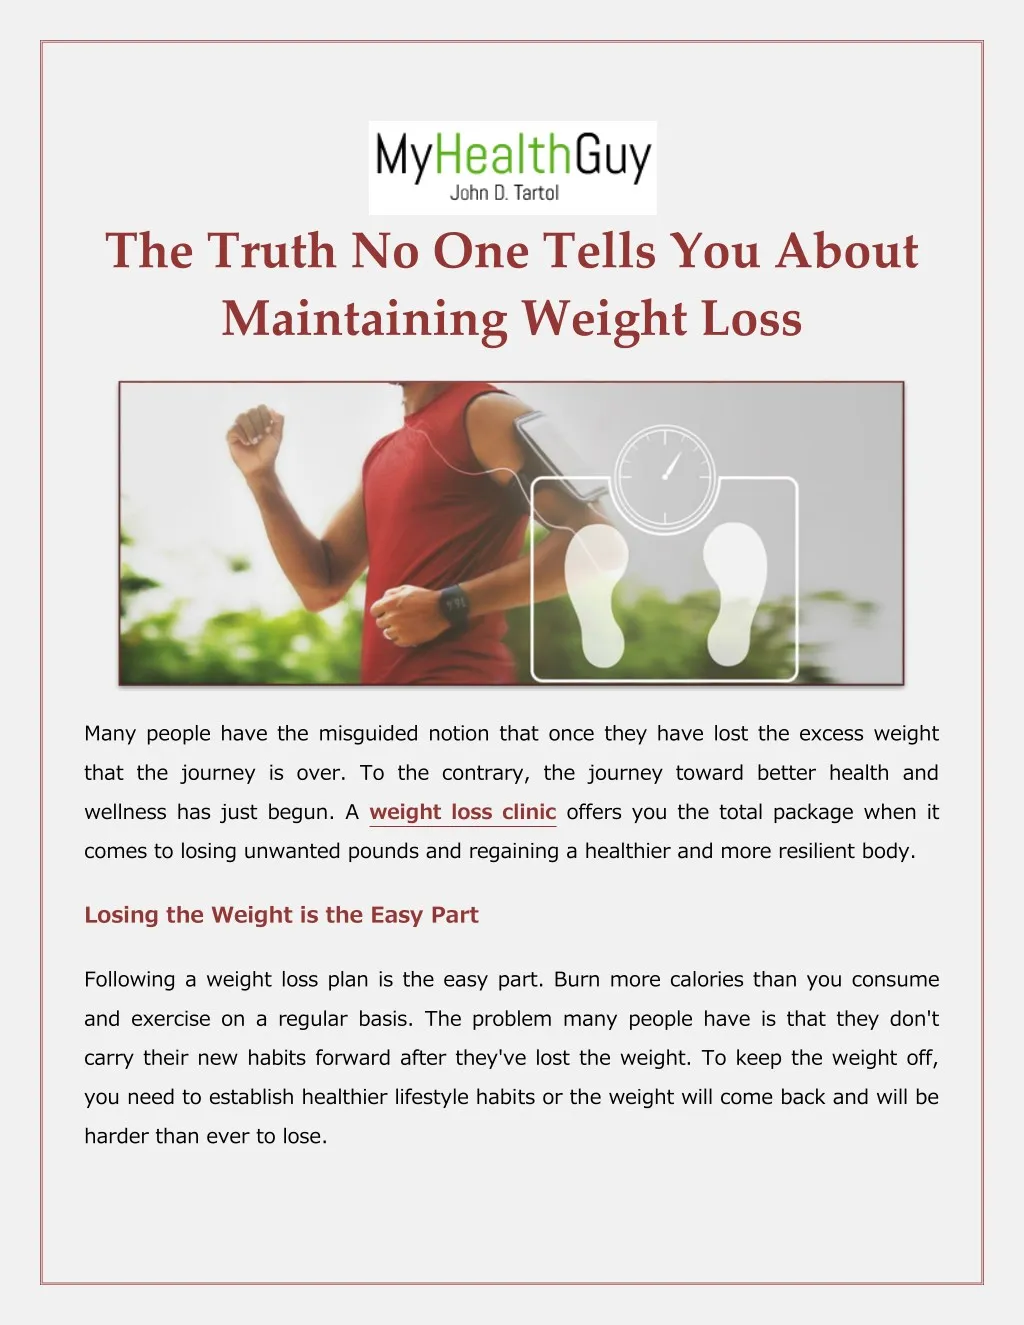 the truth no one tells you about maintaining